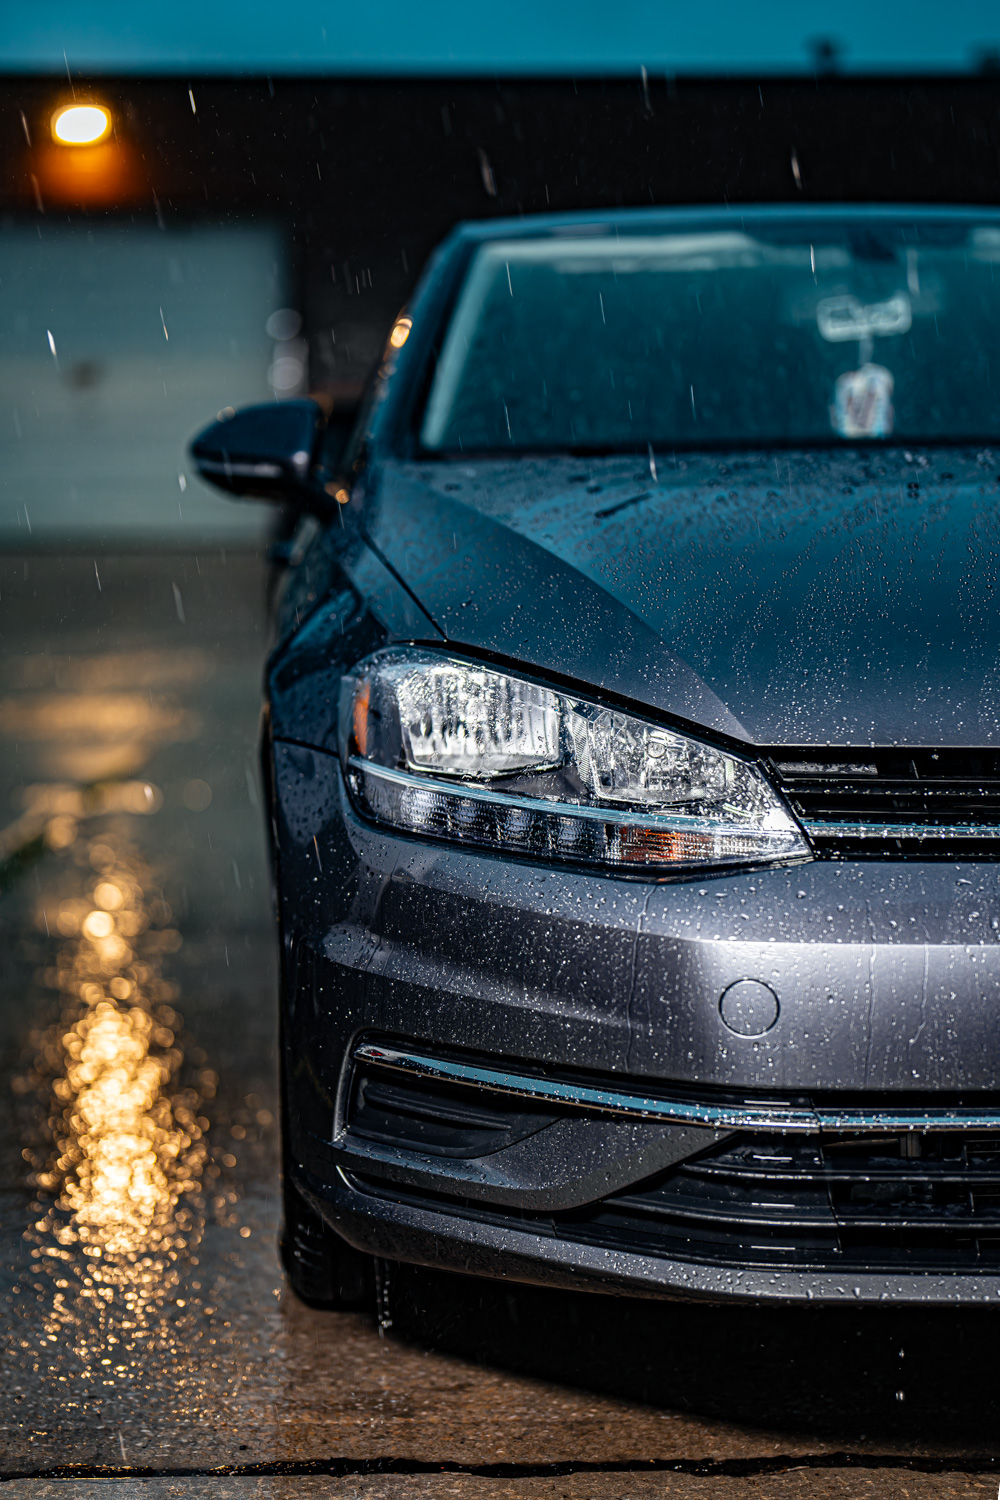 Ceramic Coatings protect against the elements, like severe thunderstorms